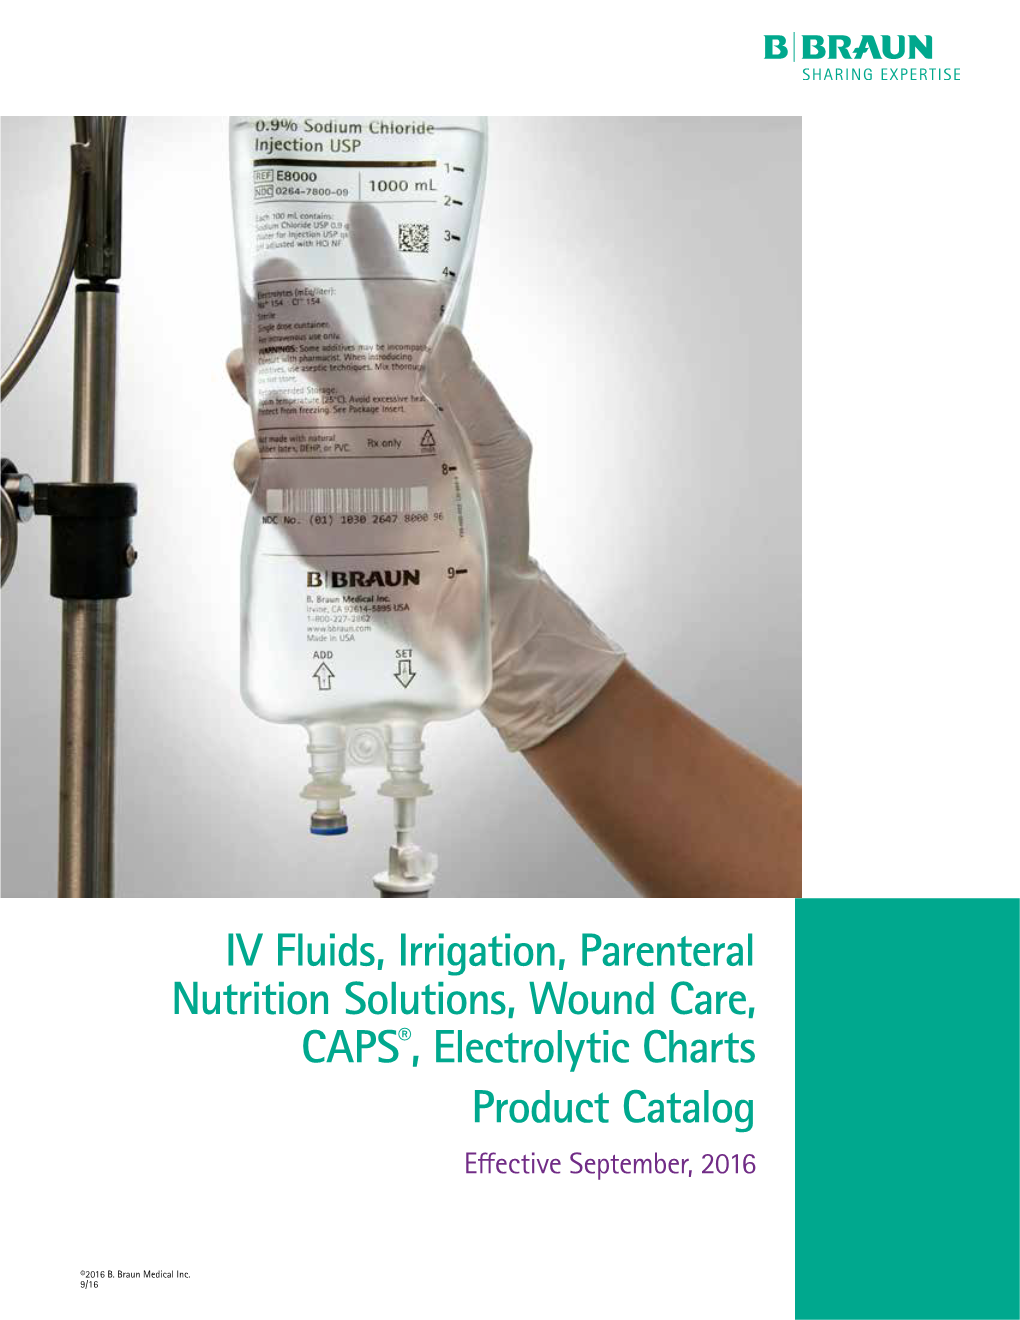 IV Fluids, Irrigation, Parenteral Nutrition Solutions, Wound Care, CAPS®, Electrolytic Charts Product Catalog Effective September, 2016